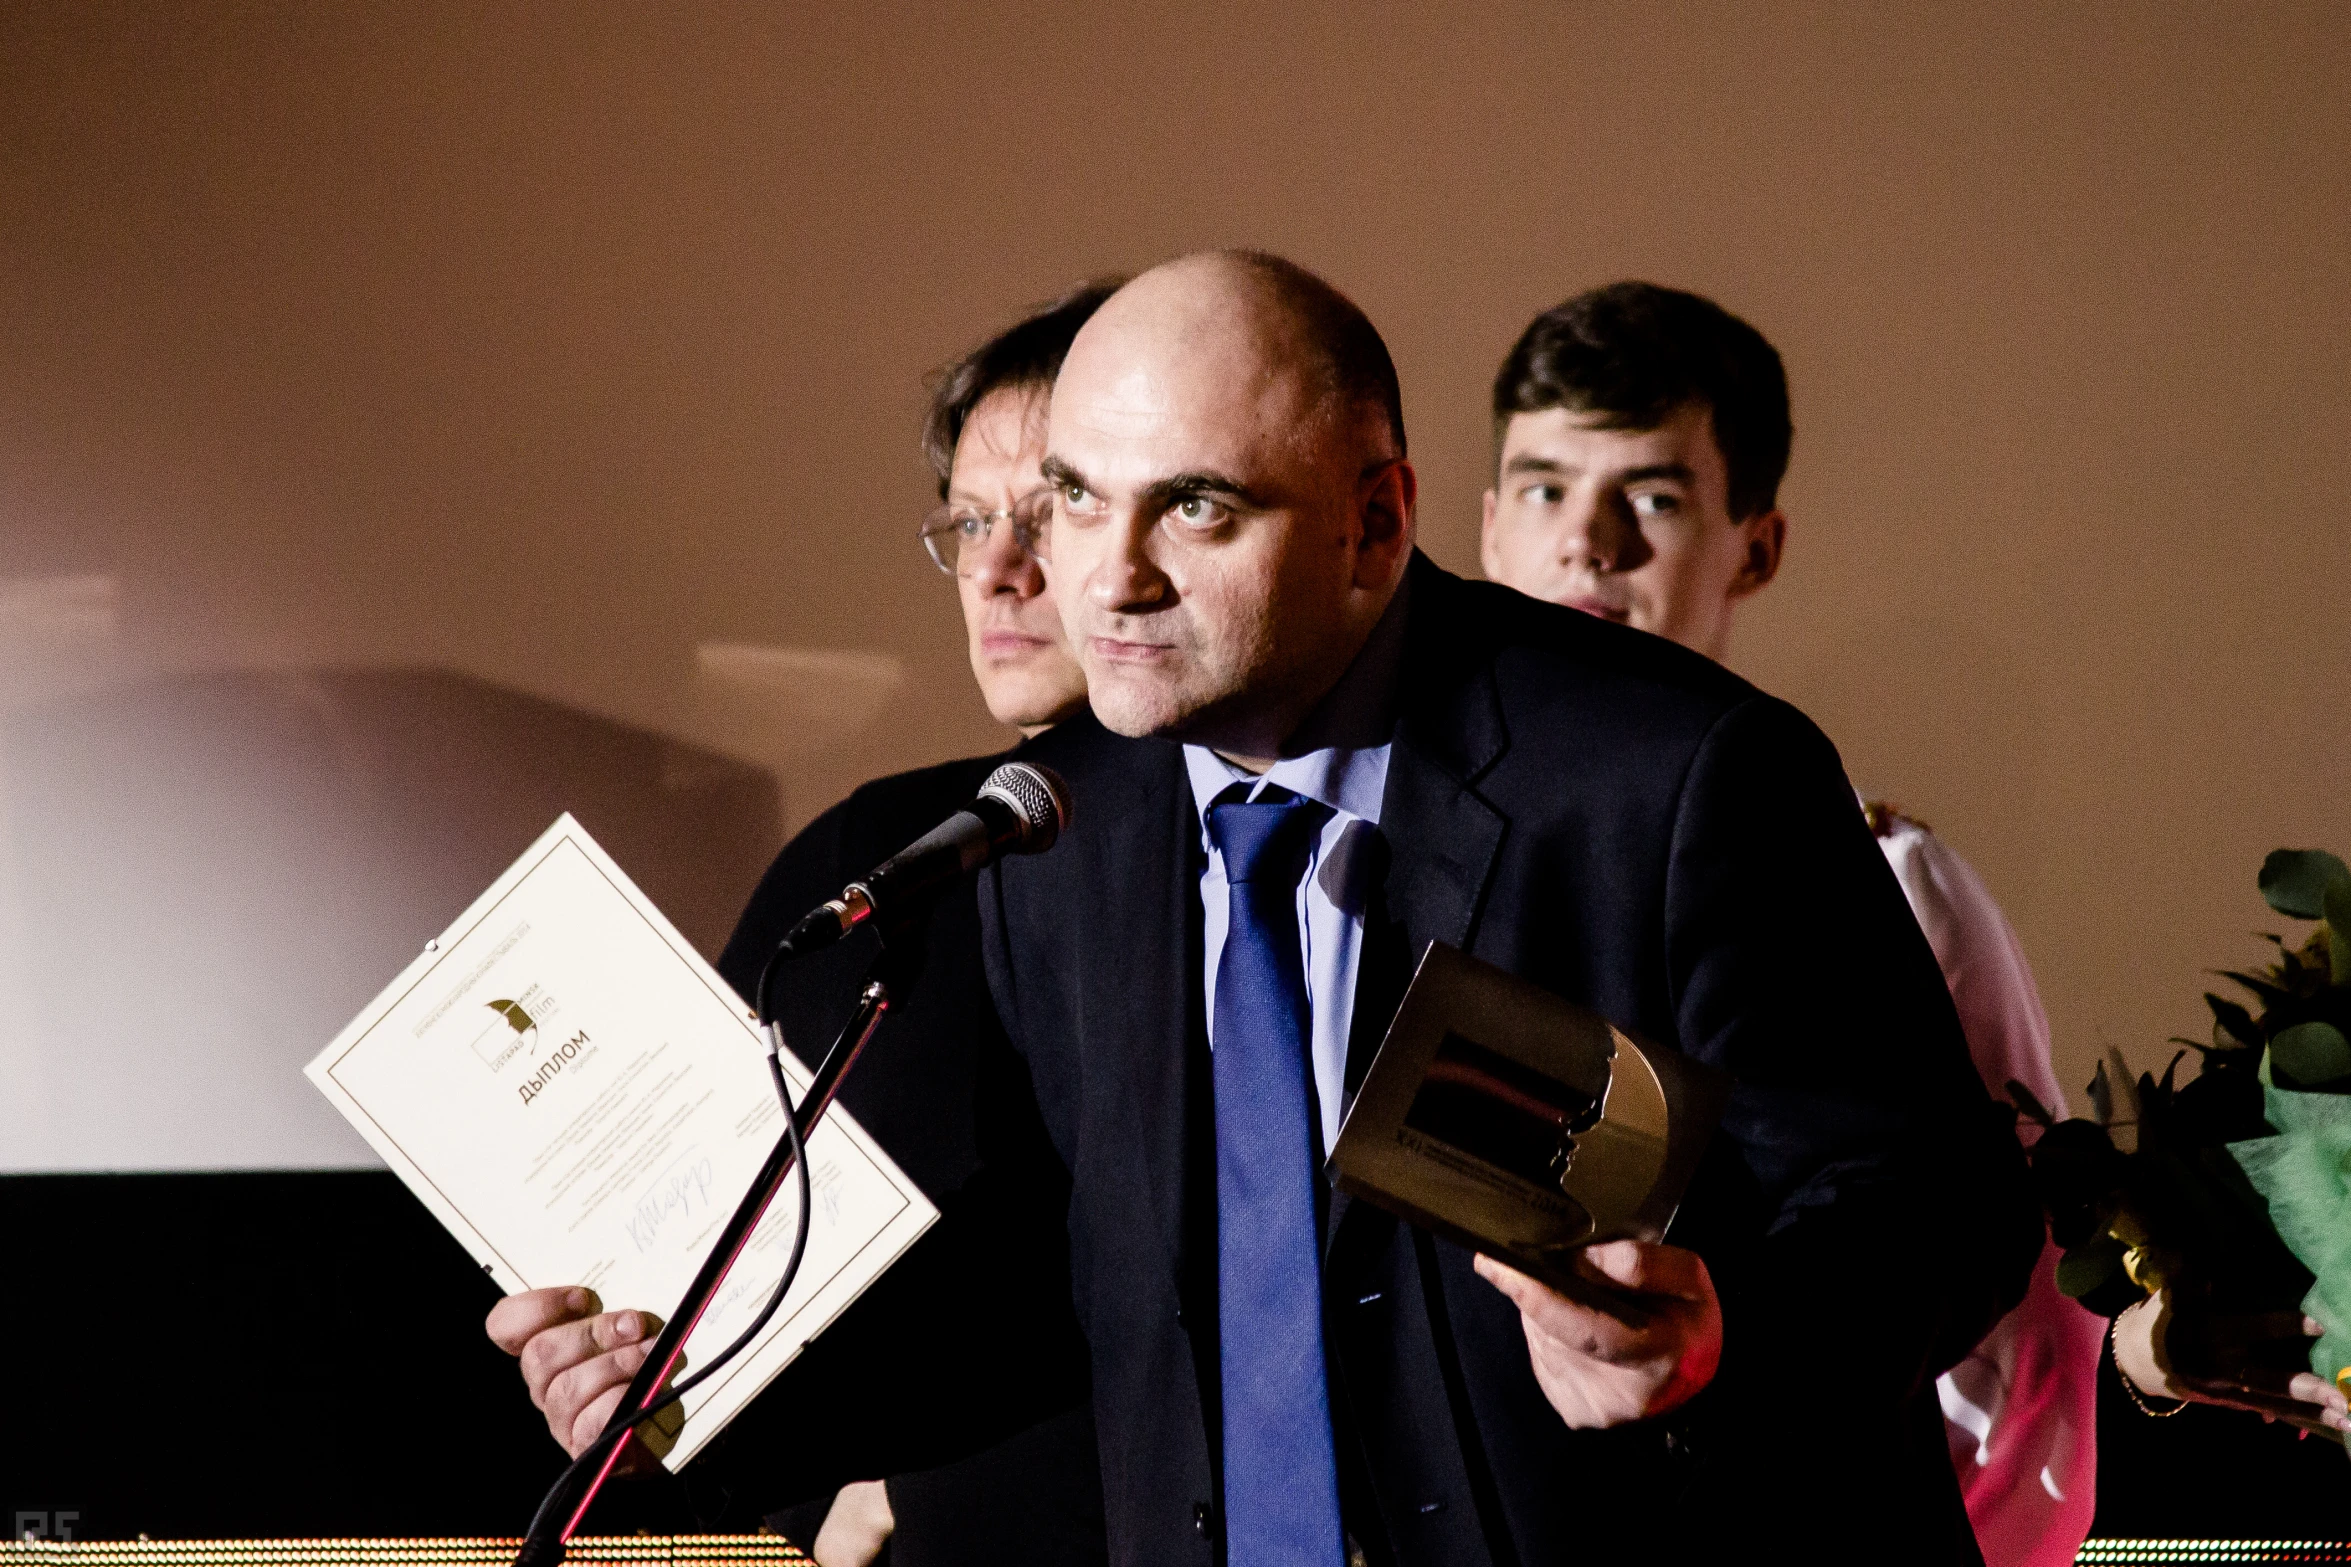 a person standing with a microphone and papers